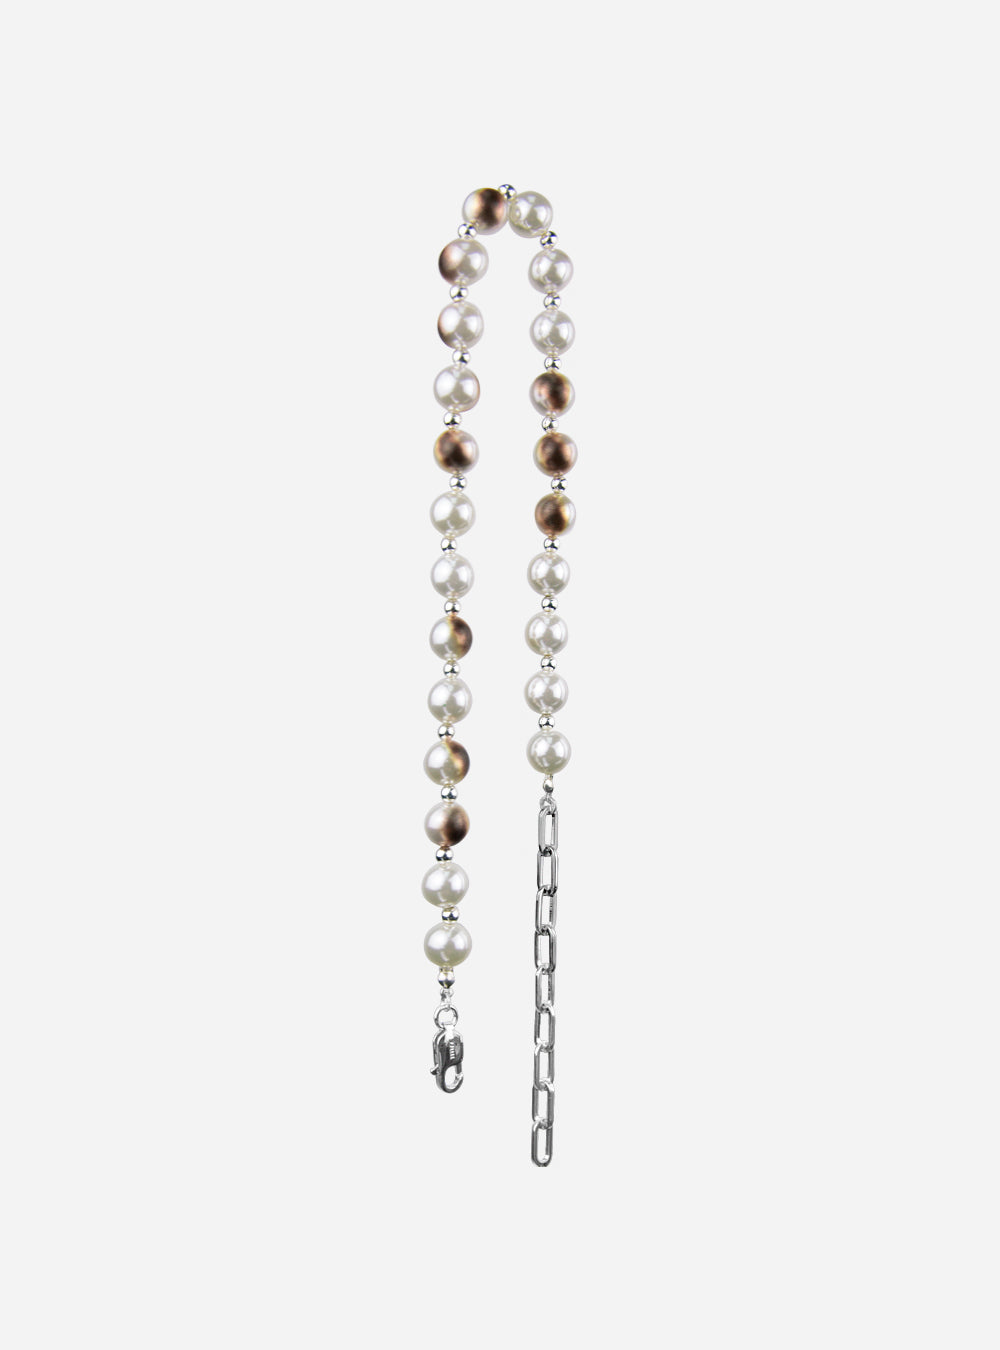 a Burnt pearls with silver beads necklace from MIDNIGHTFACTORY on a white background.